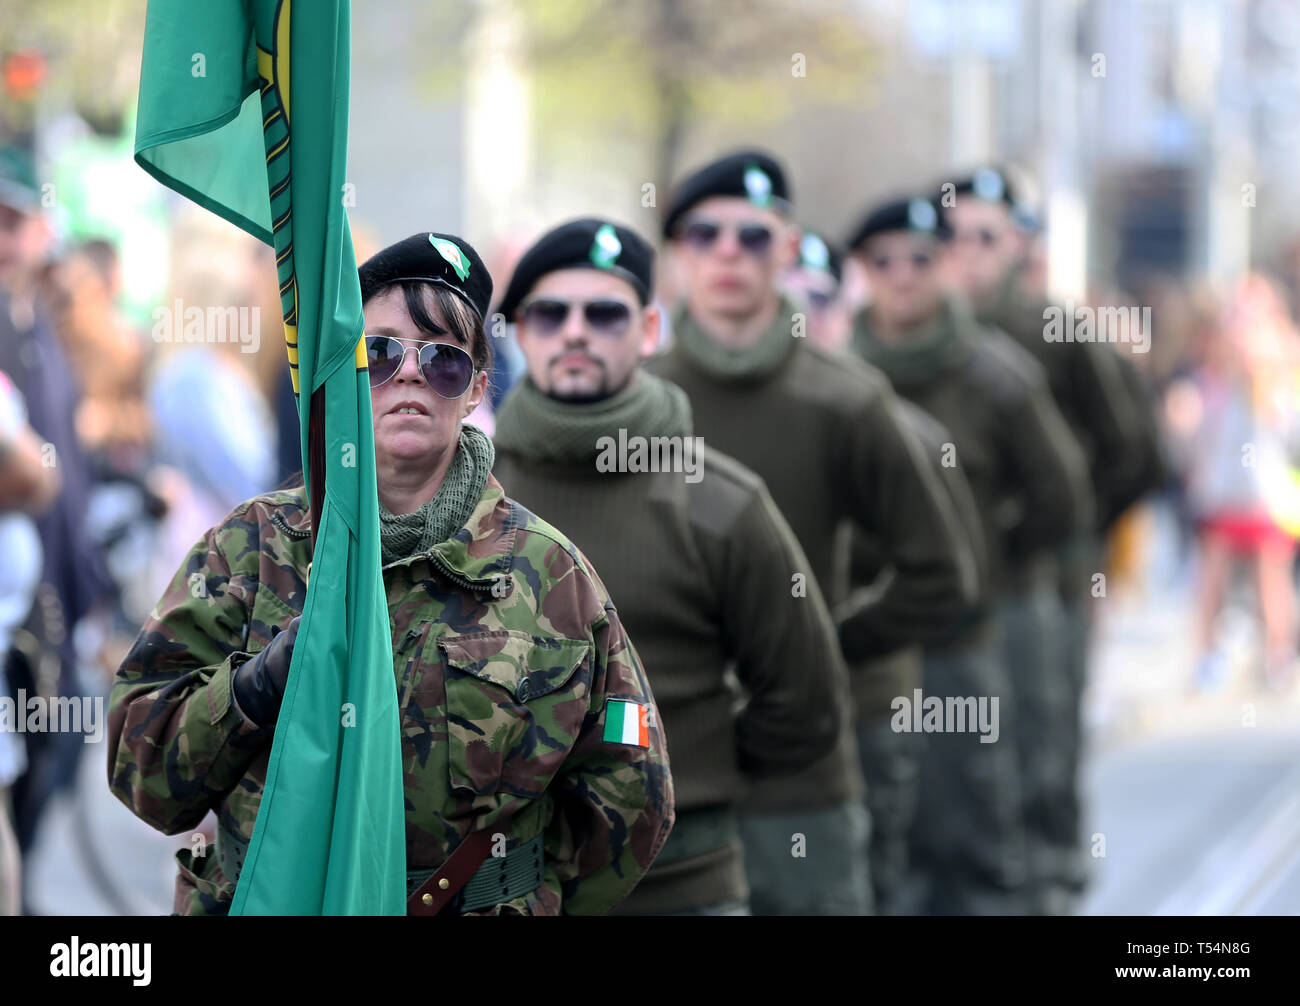 New IRA support group, Saoradh, parades through Dublin city centre in paramilitary uniforms, despite outrage over shooting dead of journalist Lyra McKee in Londonderry (Derry City) this week. Photo: Sam Boal/RollingNews.ie Stock Photo